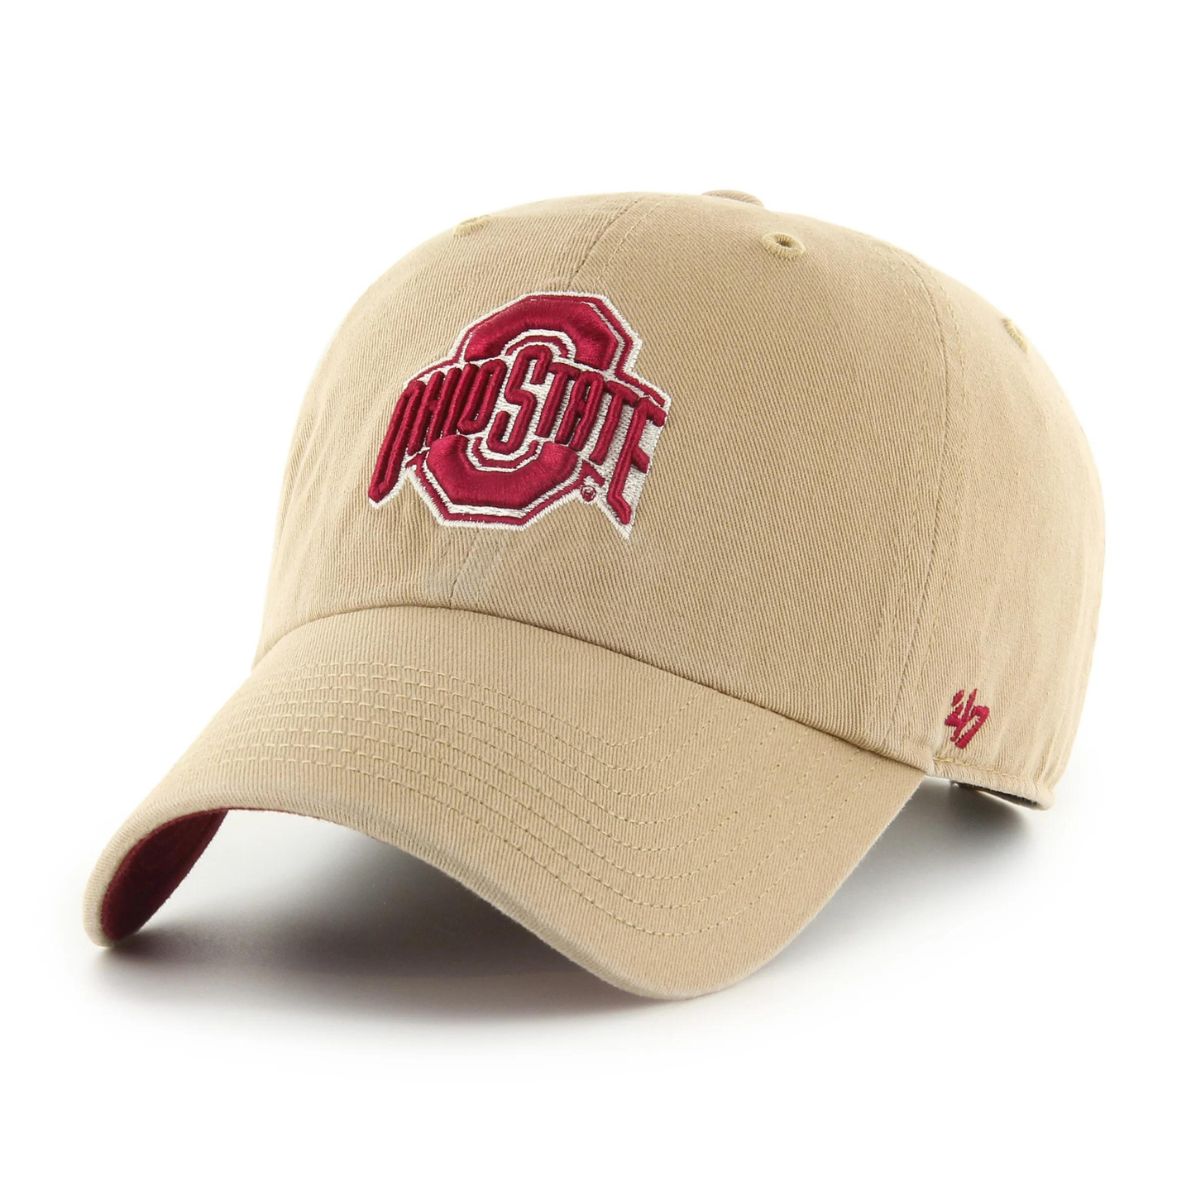 tan classic OSU logo on front of cap